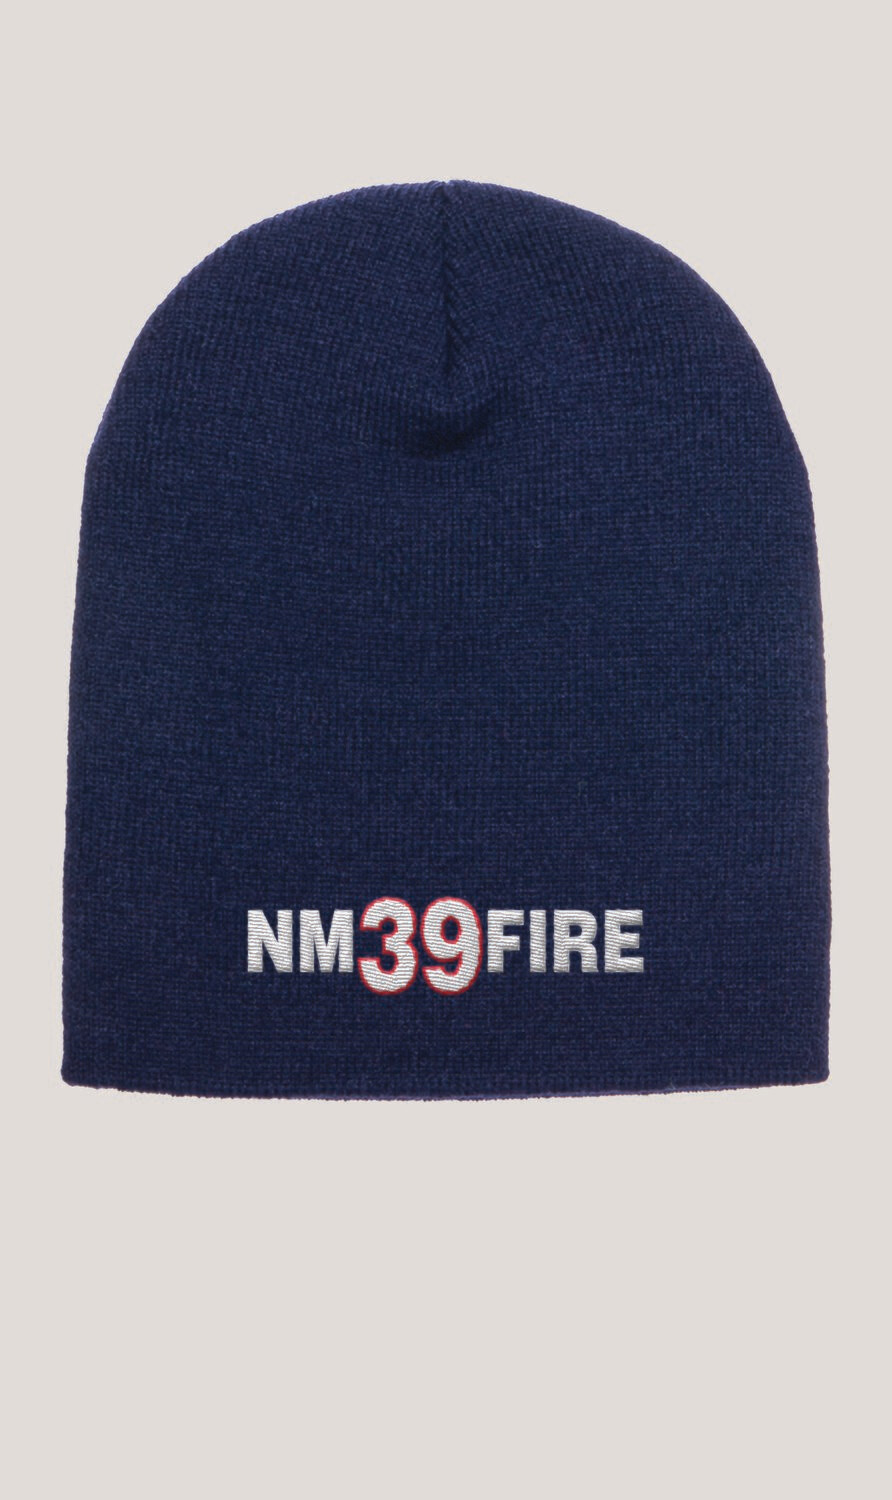 North Middleton Fire Company Adult Knit Beanie